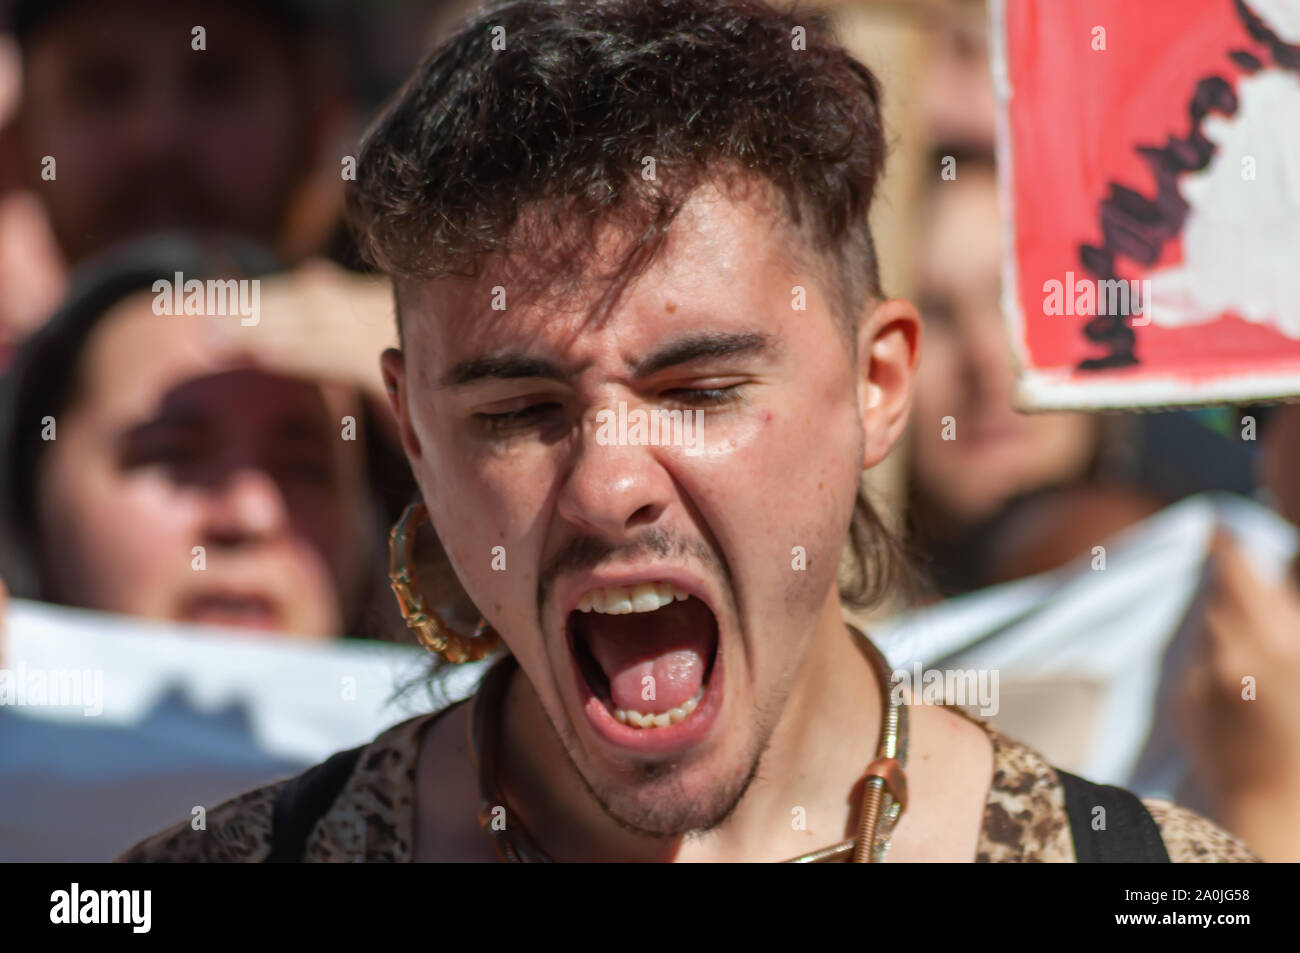 Glasgow, Scotland, UK. 20th September, 2019. A protester marching through the streets of Glasgow from Kelvingrove Park to George Square during the Global Climate Strike demonstration to demand action on the world's climate crisis. Credit: Skully/Alamy Live News Stock Photo